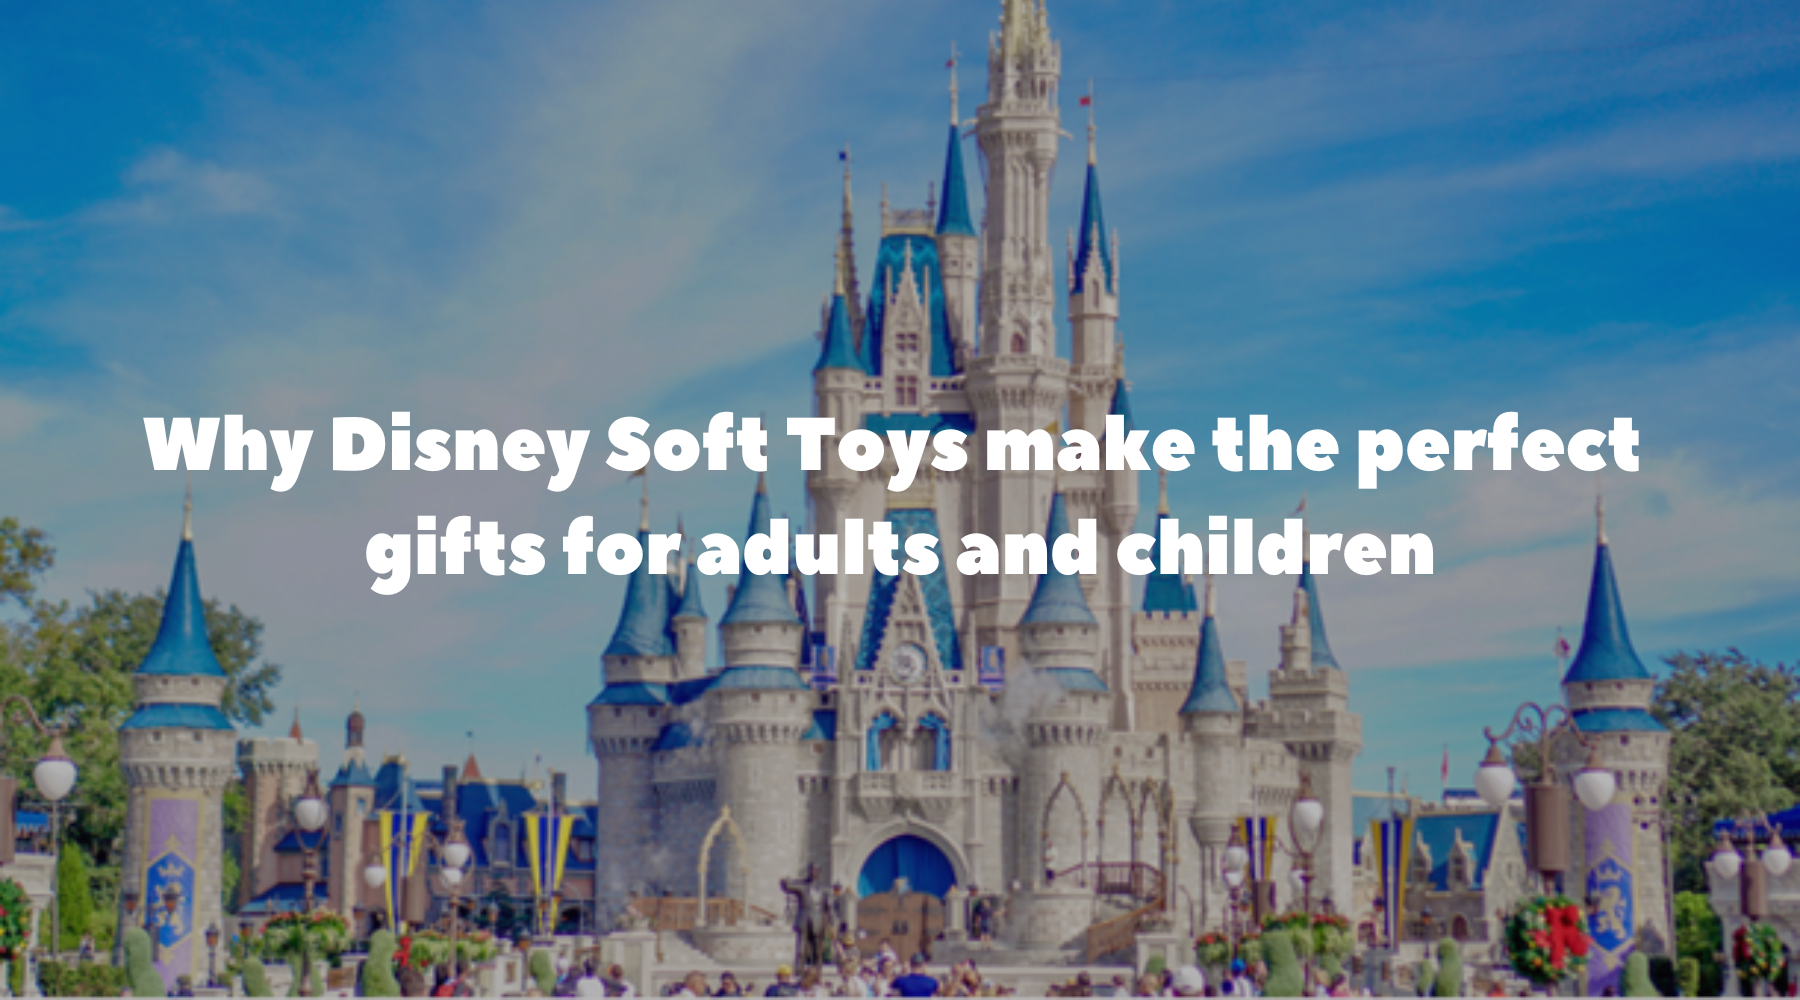 Why Disney Soft Toys make the perfect gifts for adults and children